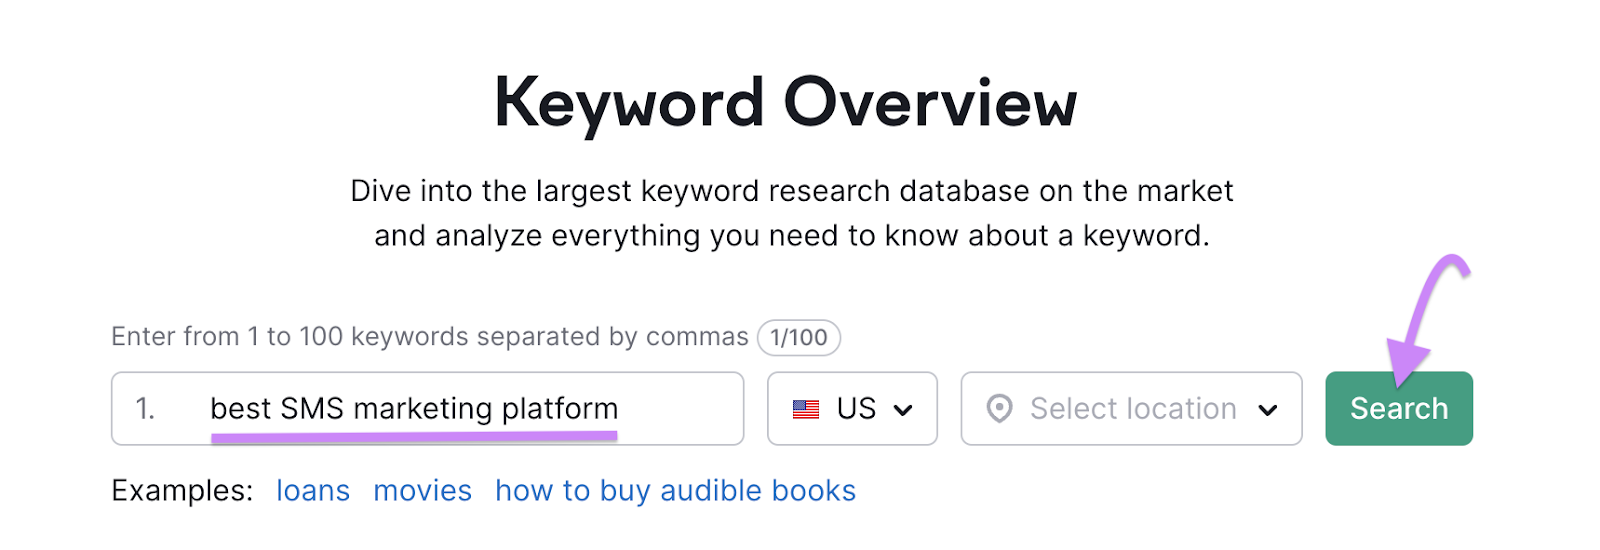 Search barroom  successful  the Keyword Overview tool.